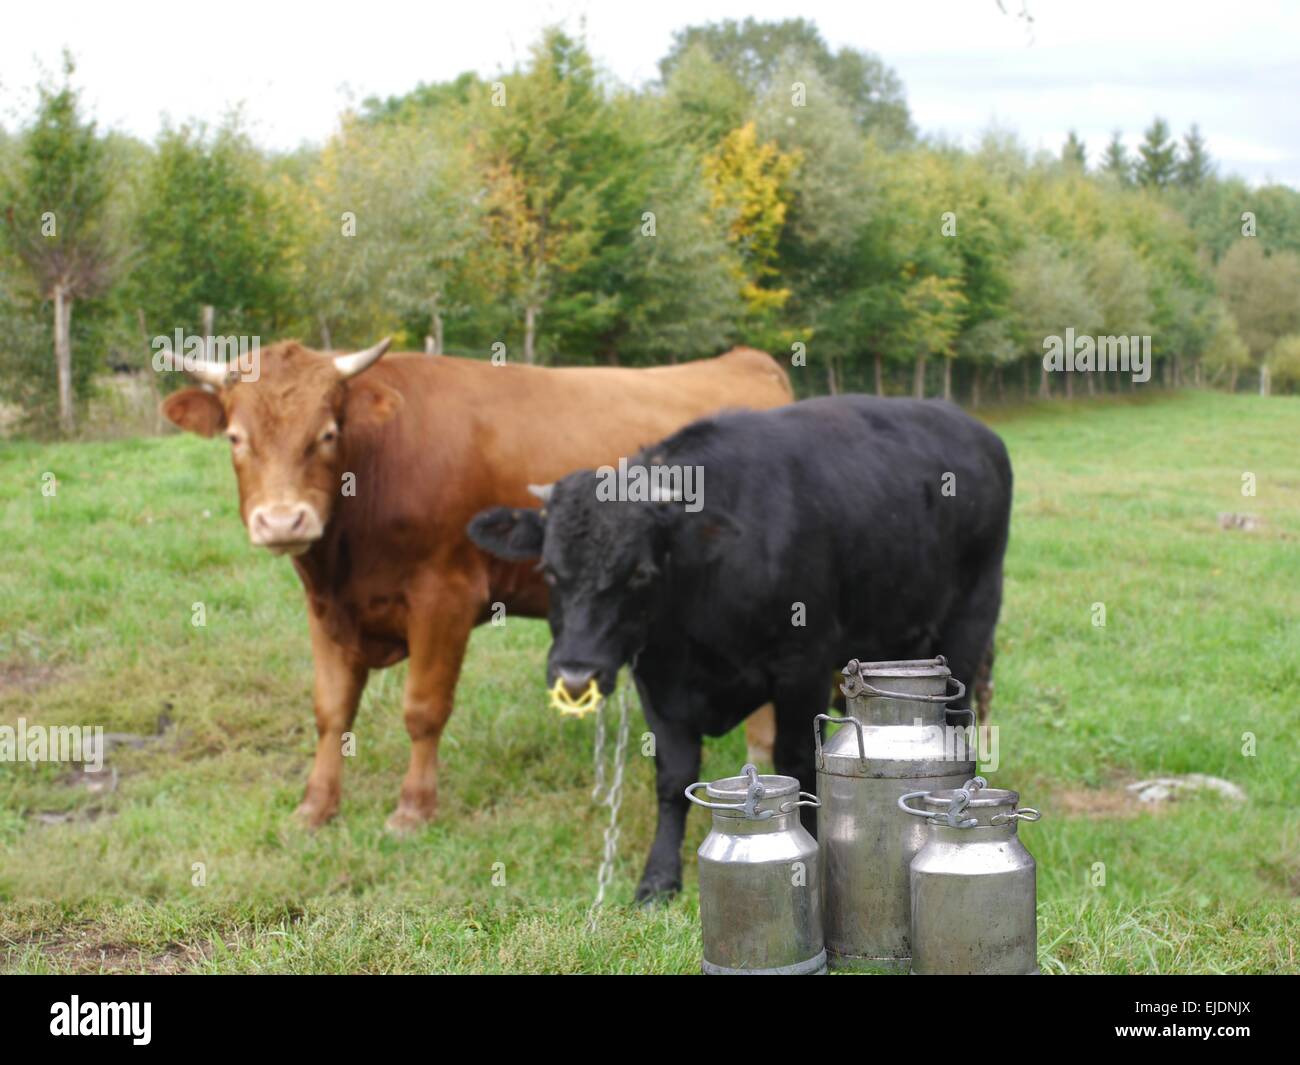 they three metal cans on milk on cow backgrpund Stock Photo